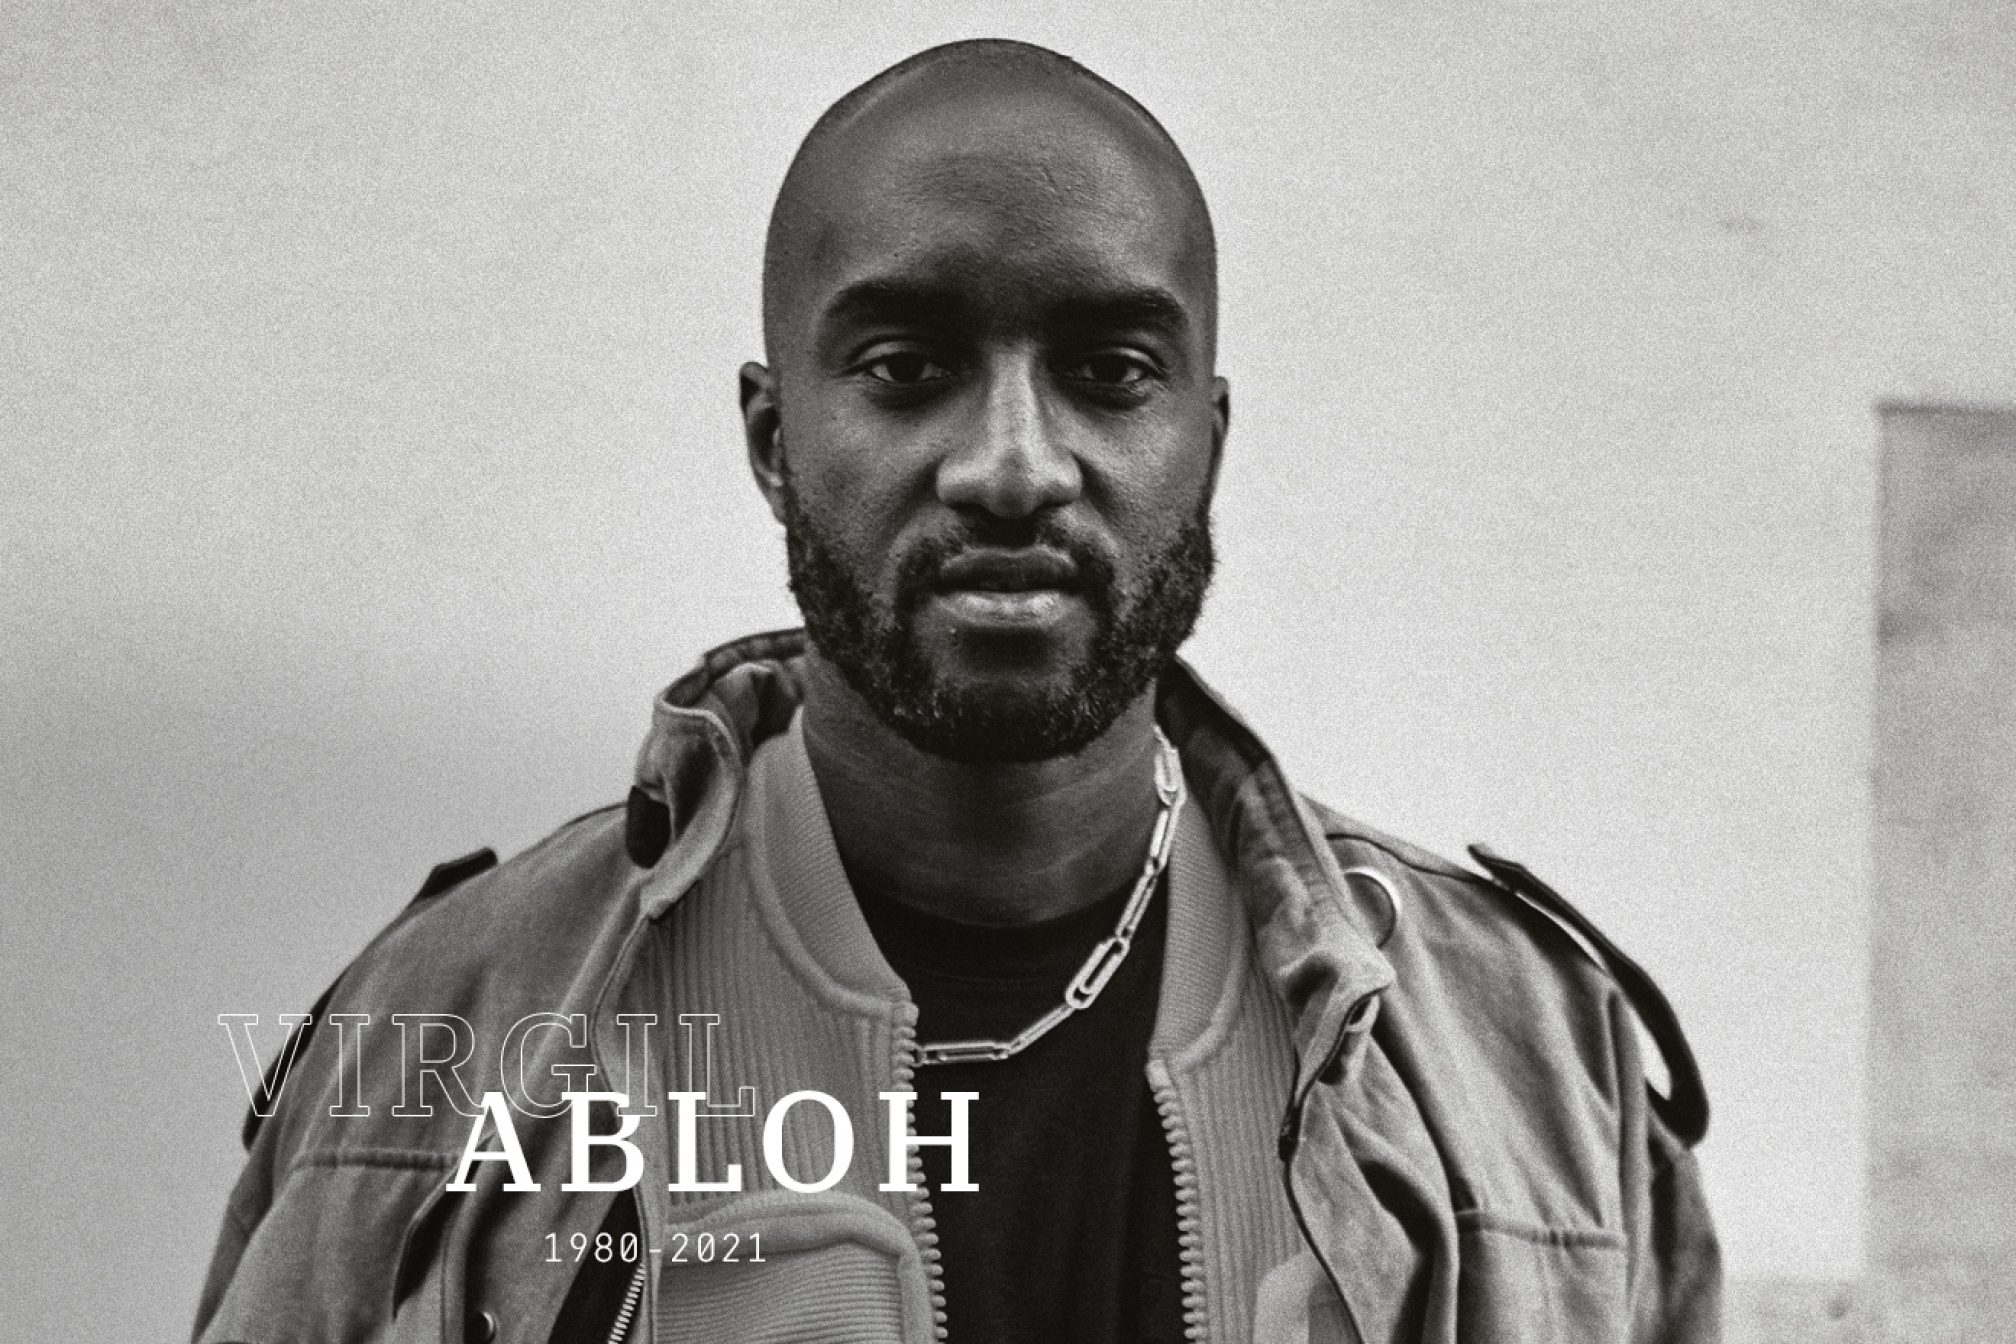 Louis Vuitton's tribute to Virgil Abloh in the brand's Milanese